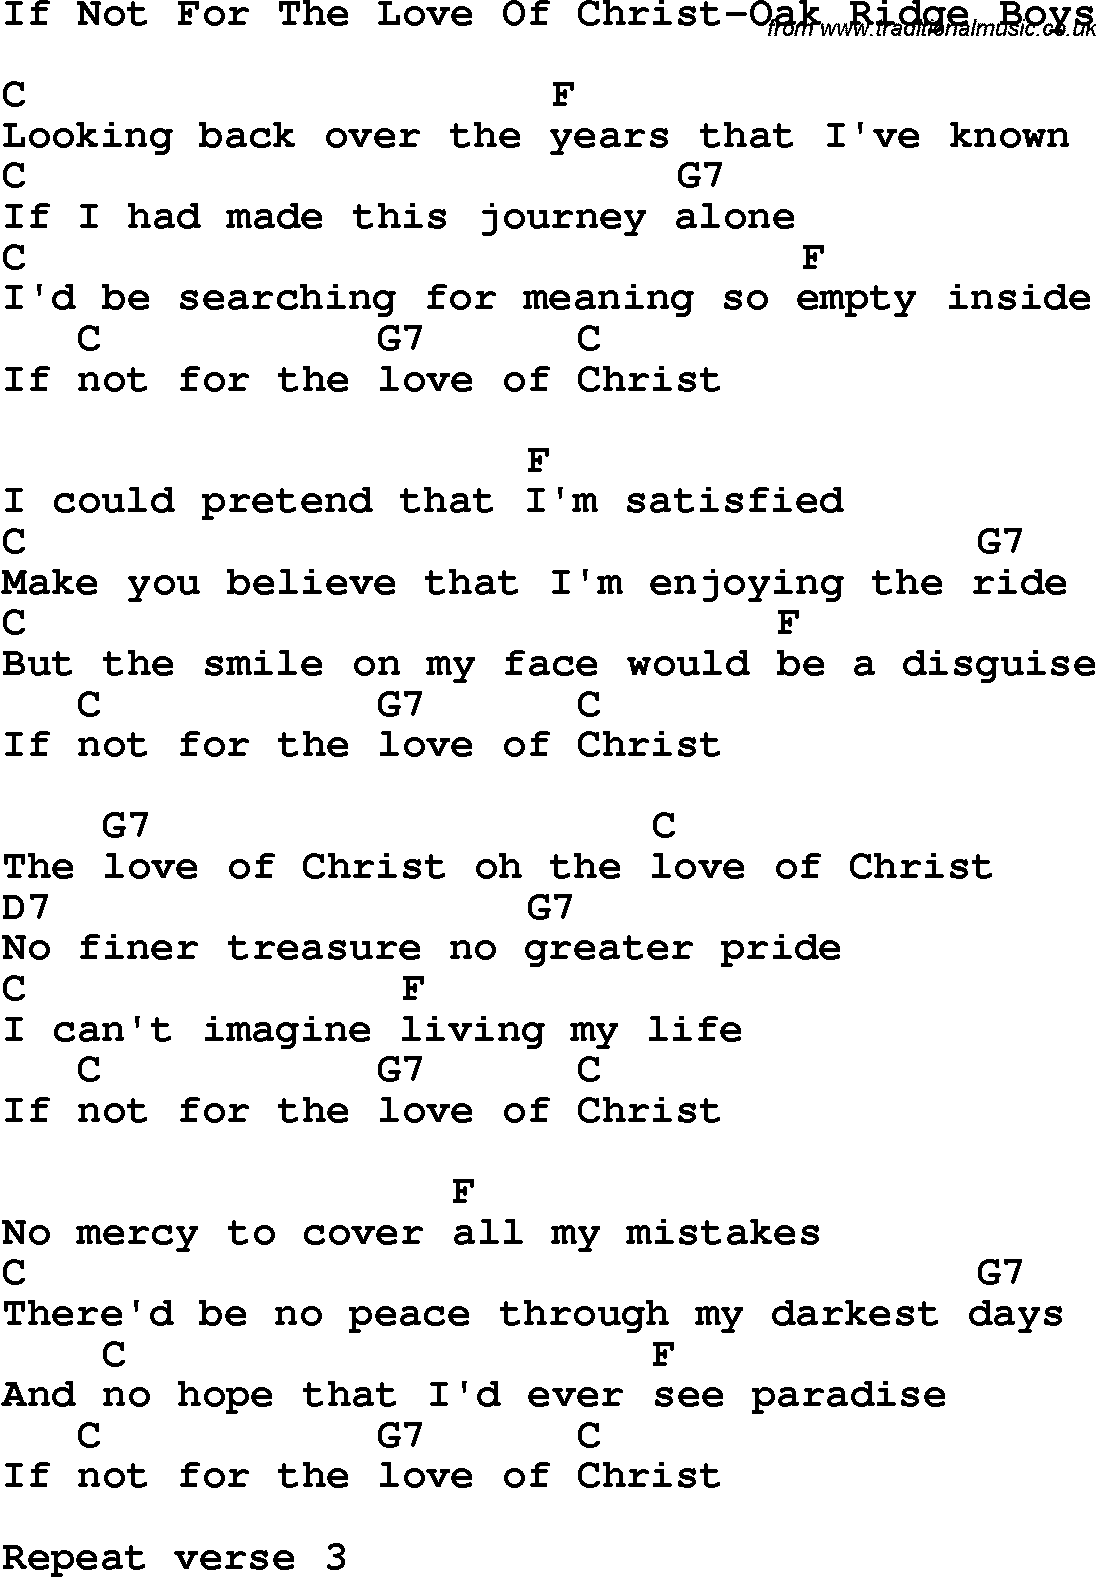 Country, Southern and Bluegrass Gospel Song If Not For The Love Of Christ-Oak Ridge Boys lyrics and chords